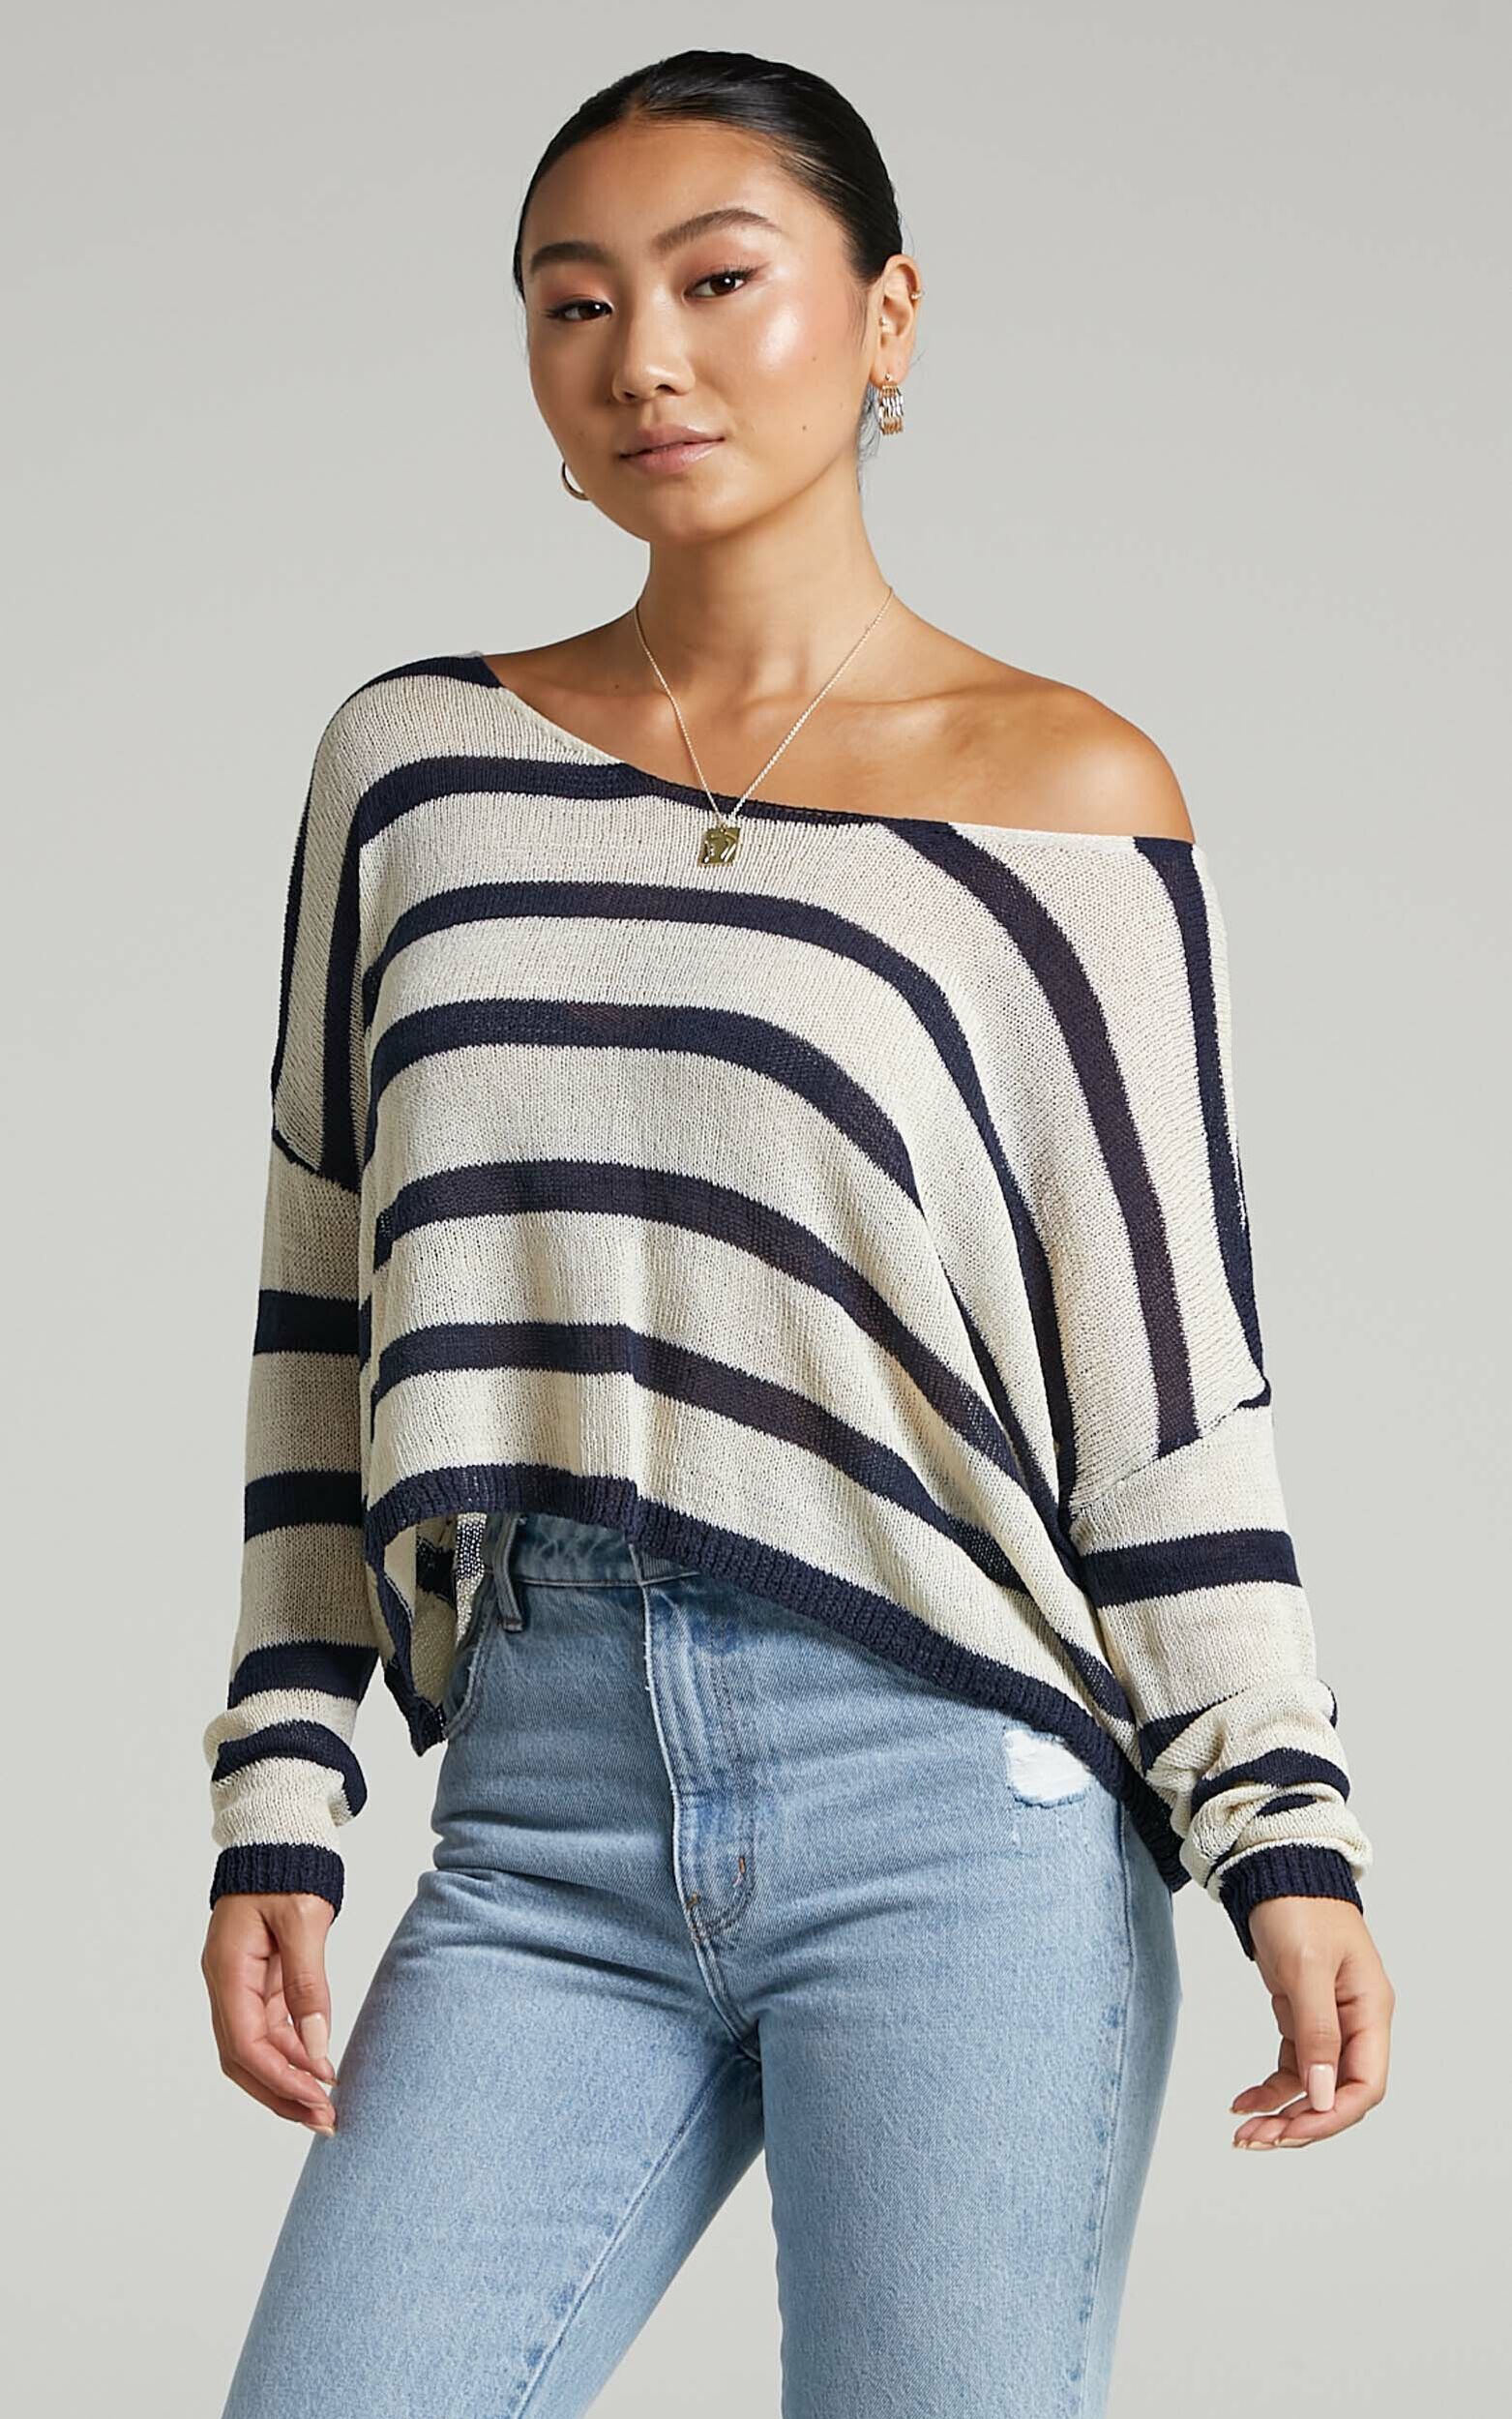 Dhani Relaxed Woven Knit Top in Navy Stripe - 04, NVY1